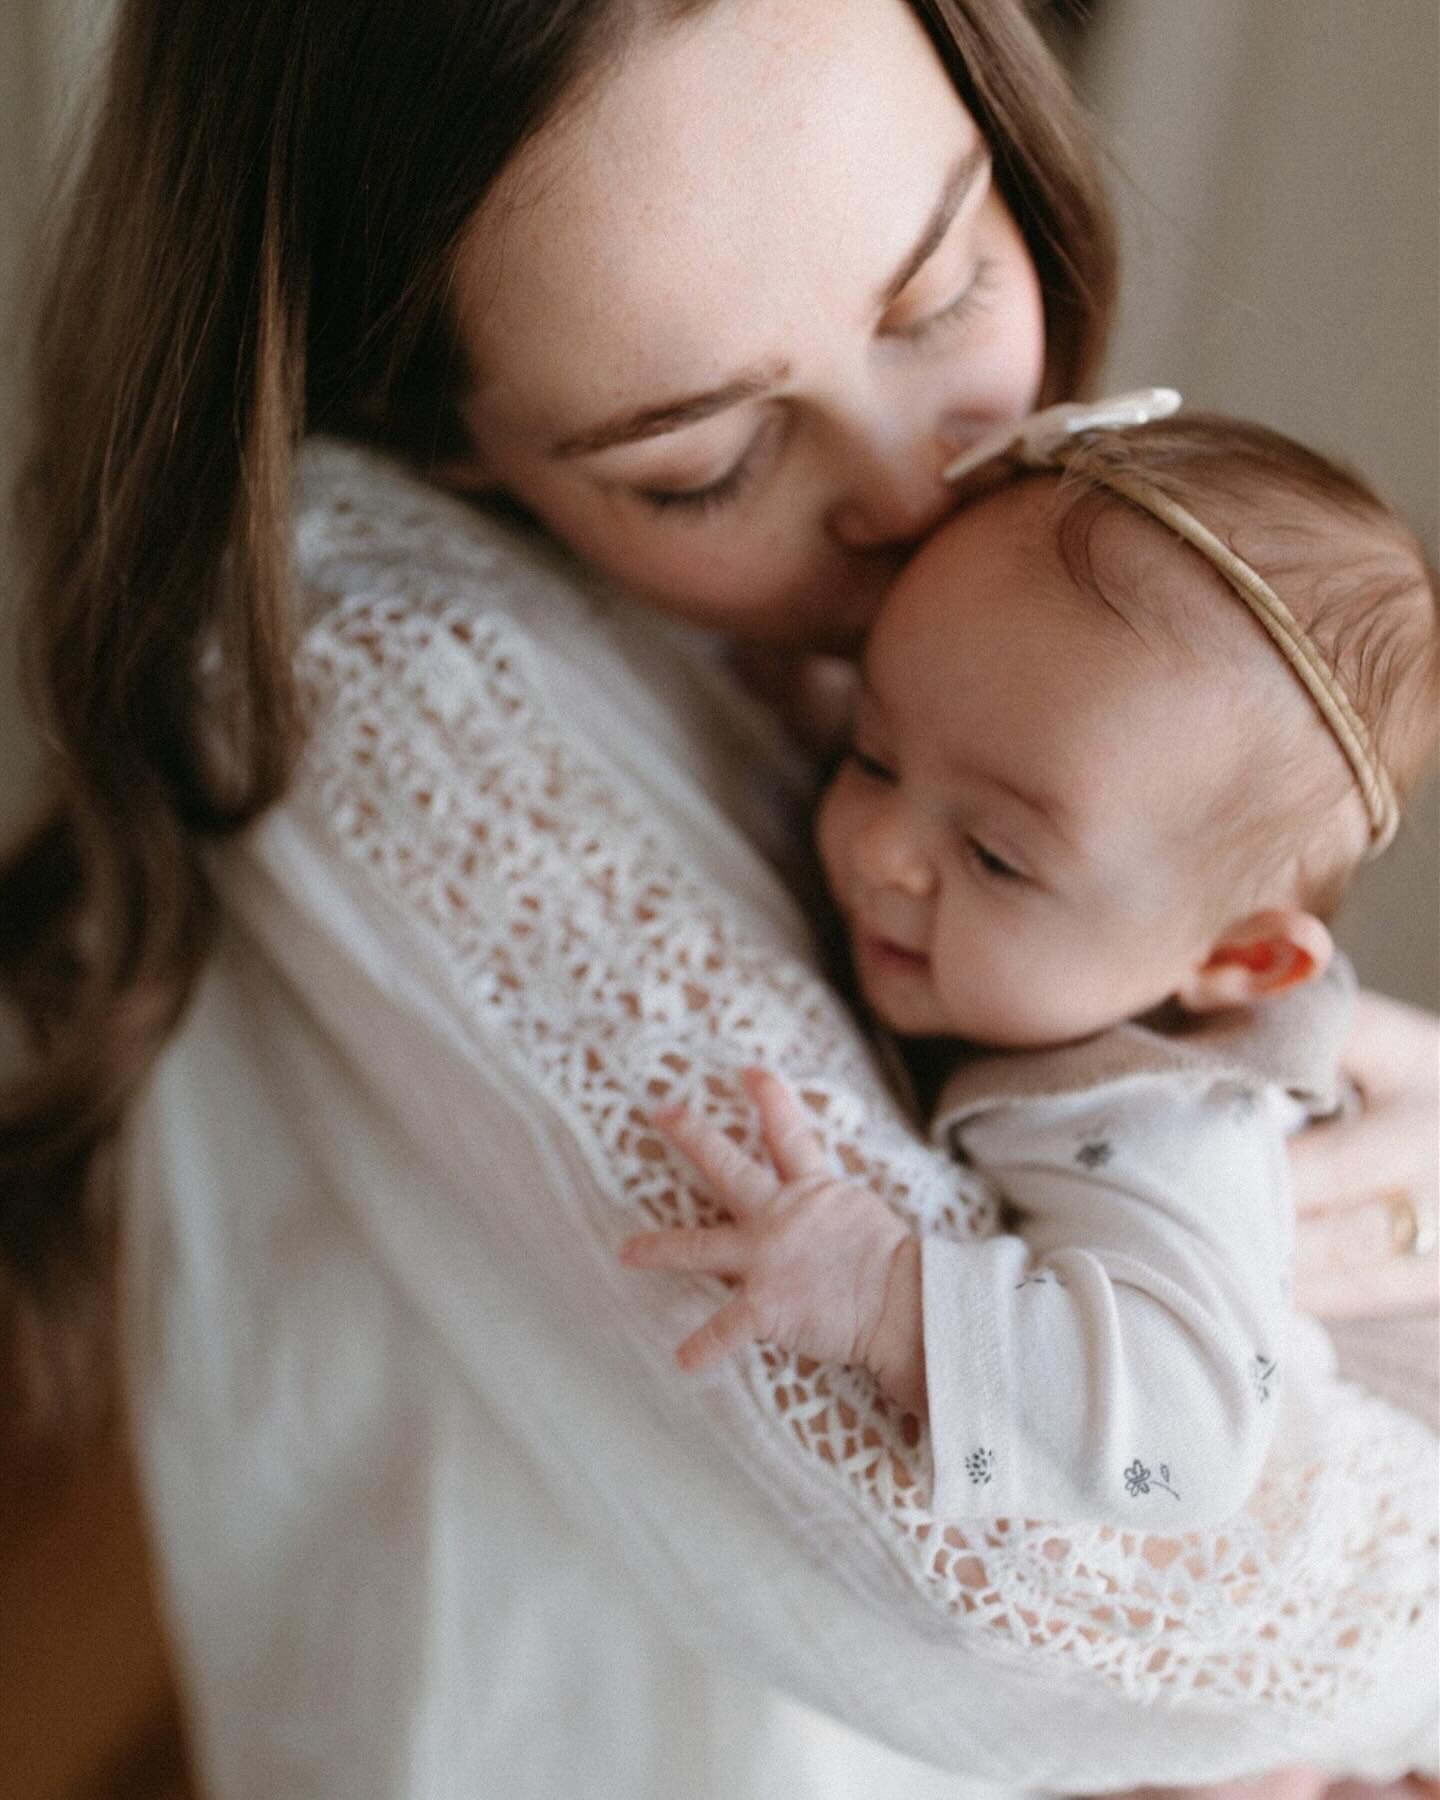 Snuck in a session with these friends while they were in town back in December. Loved this time getting to capture some moments of them snuggling their sweet girl. Watching friends become parents is my favorite thing. 
.
.
Currently hiding away with 